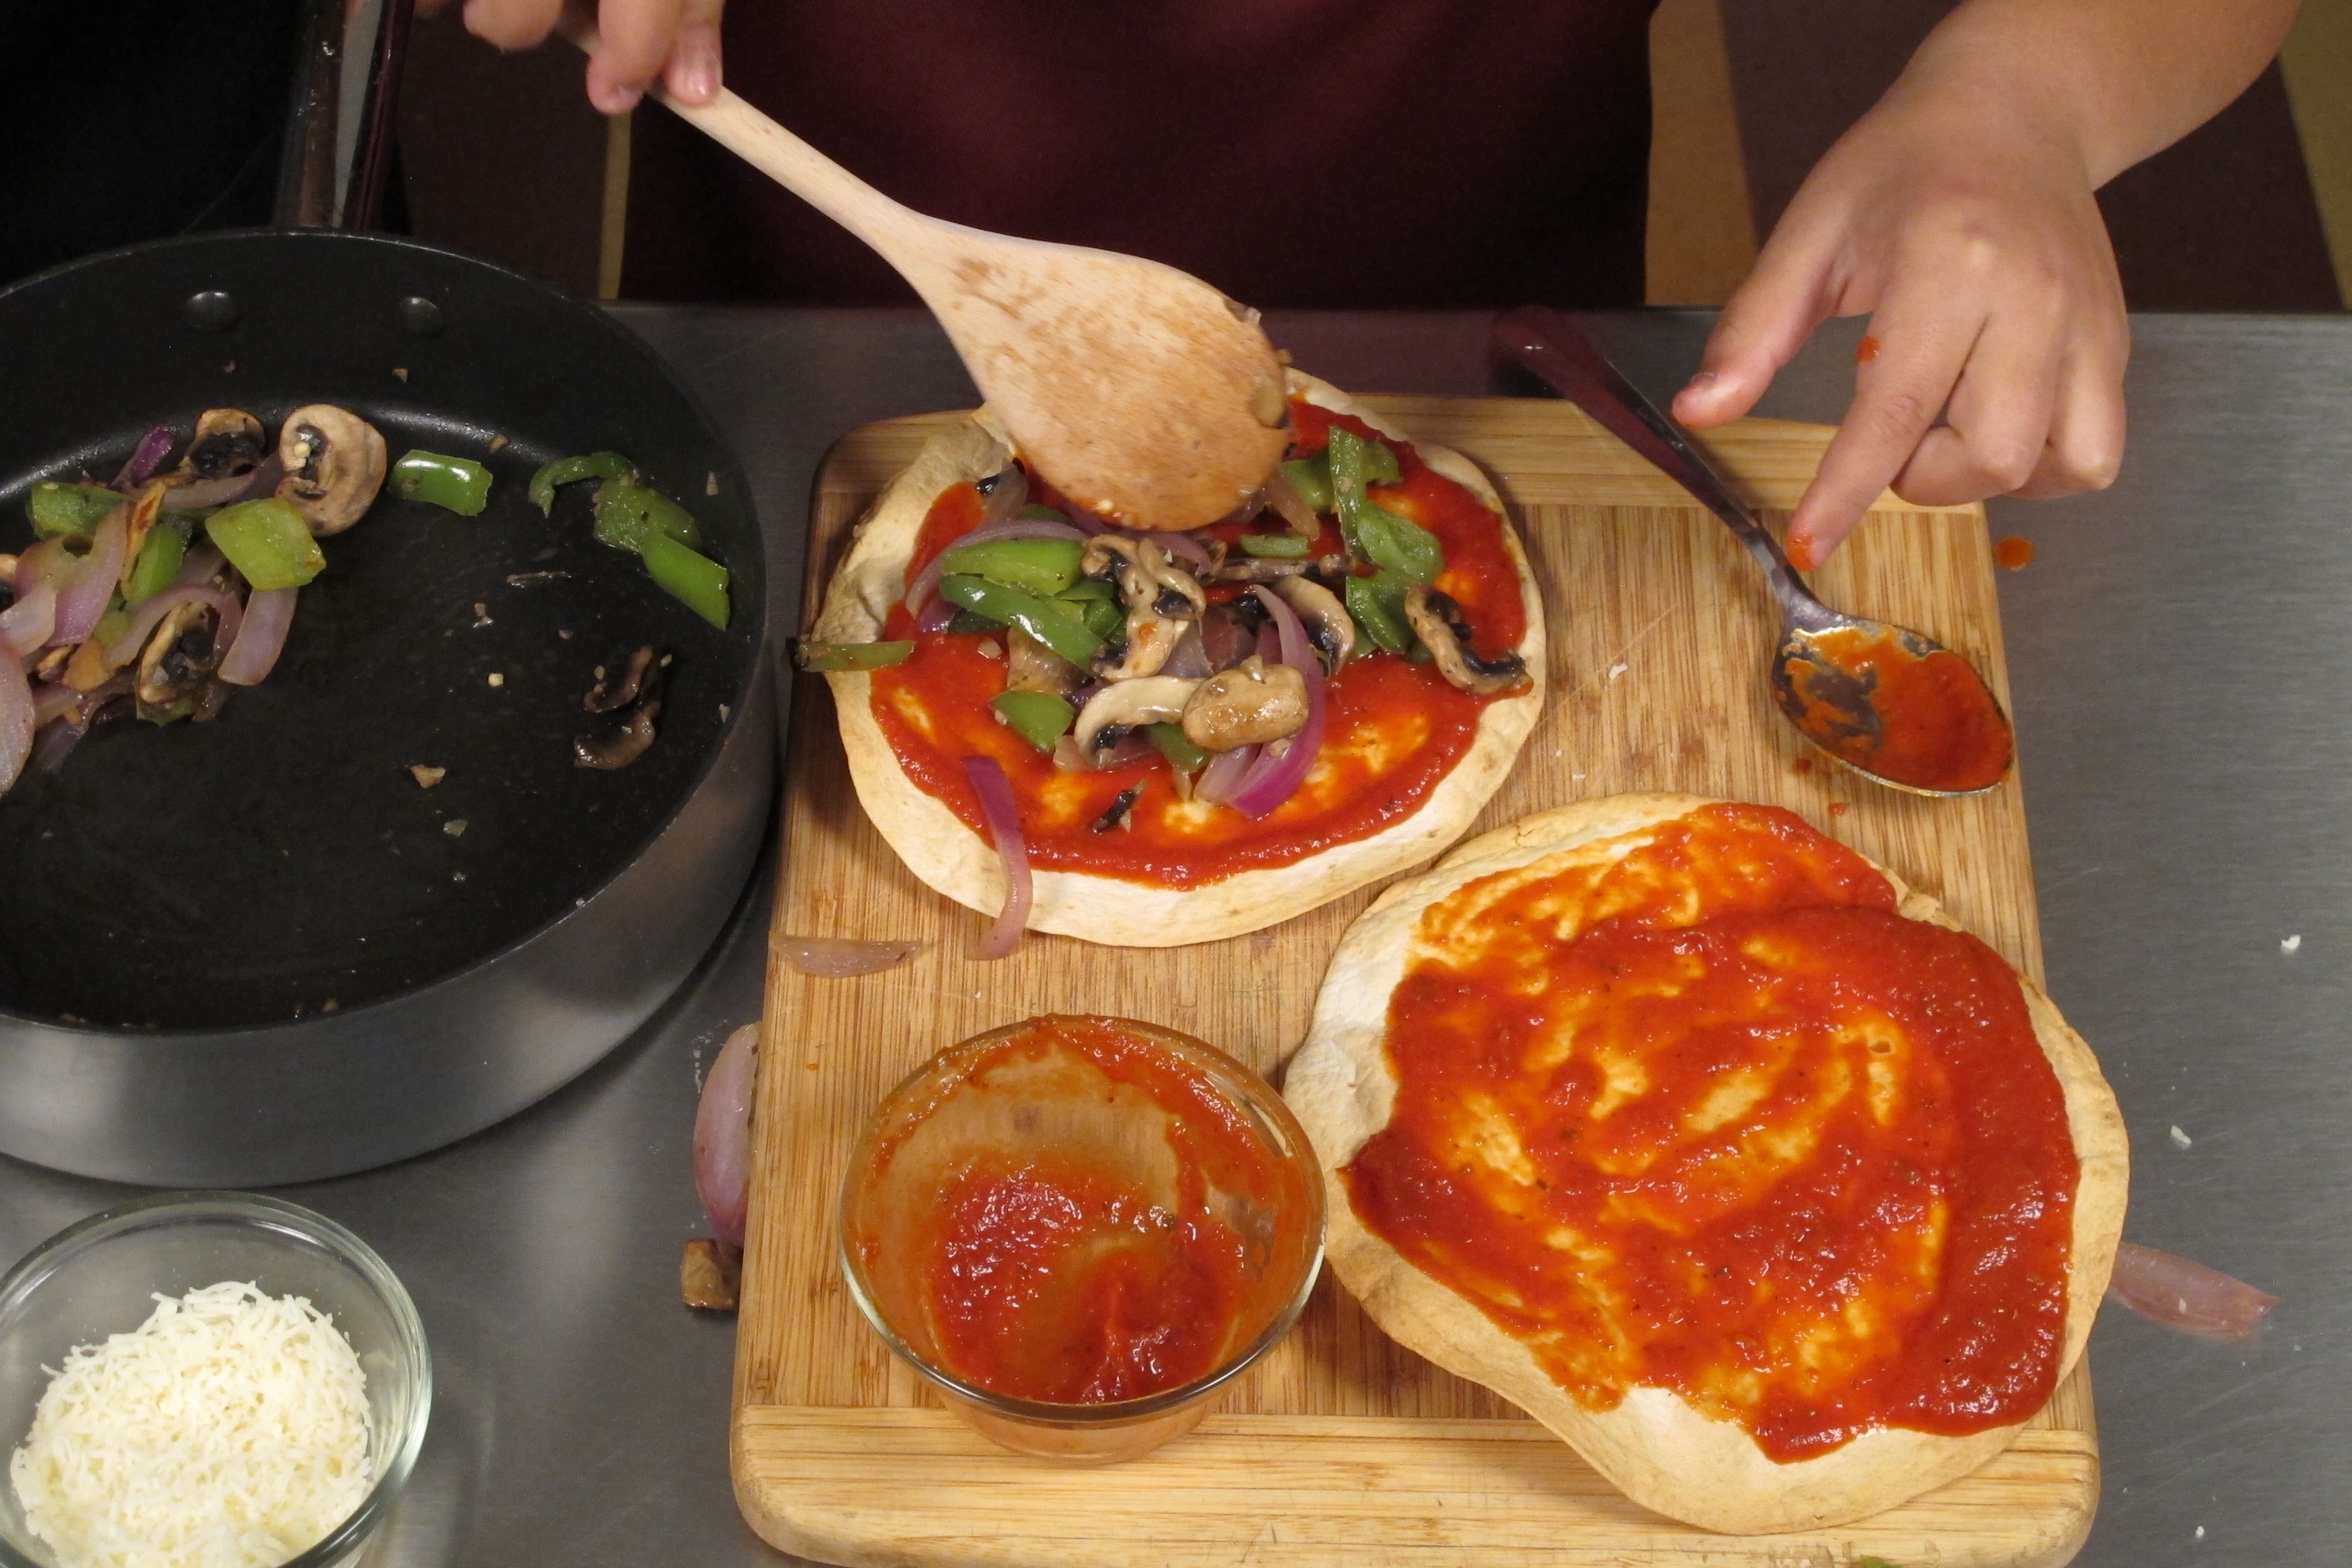 Spread 2 tablespoons of tomato sauce and a bit of the vegetable mixture onto each tortilla crust.